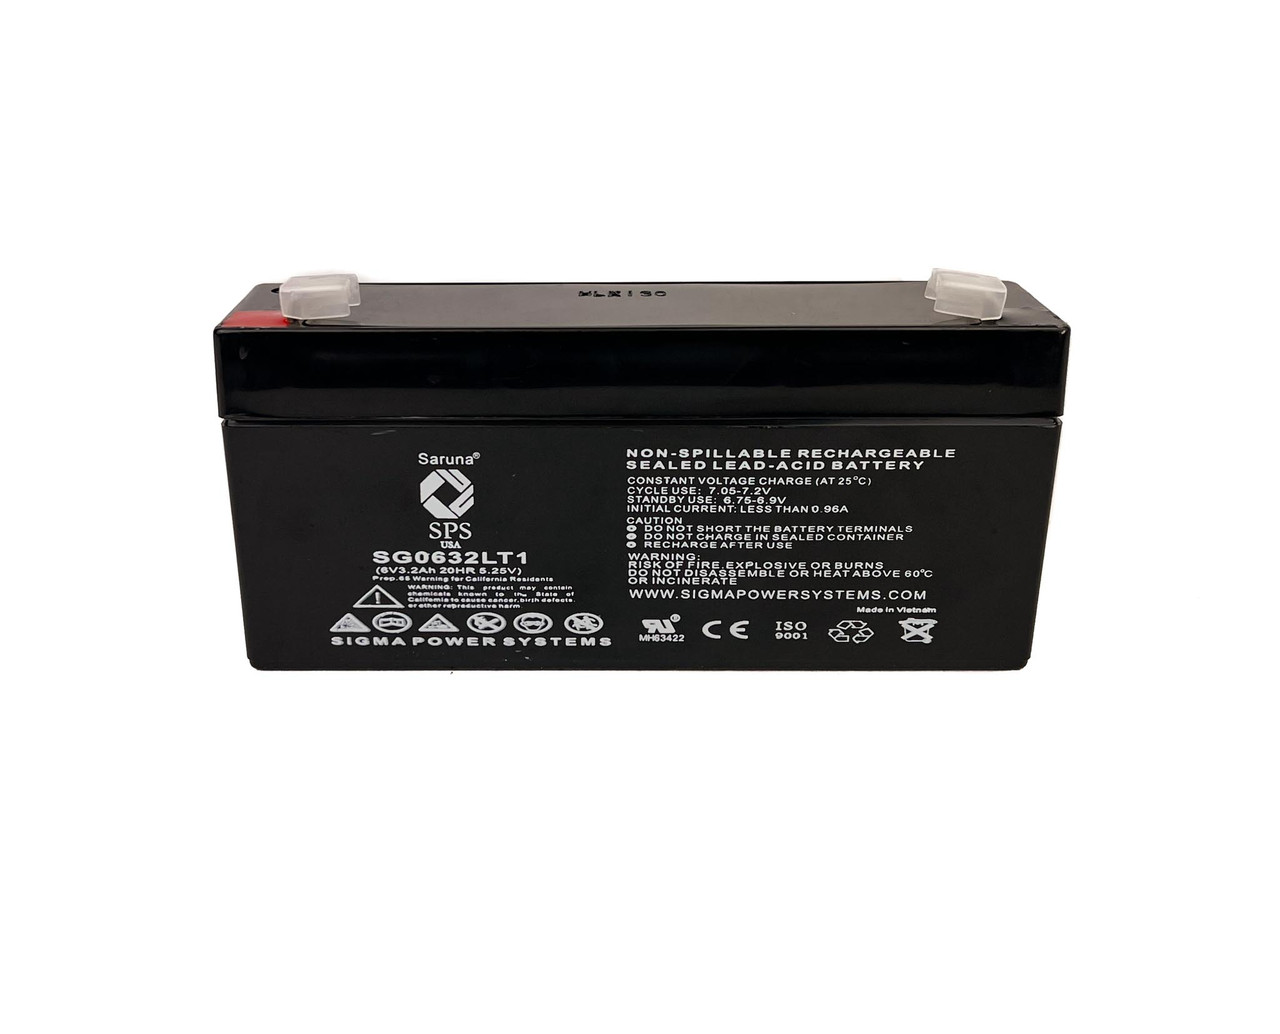 Raion Power RG0632LT1 6V 3.2Ah Compatible Replacement Battery for Alaris Medical 590 Keofeed Infusion Pump